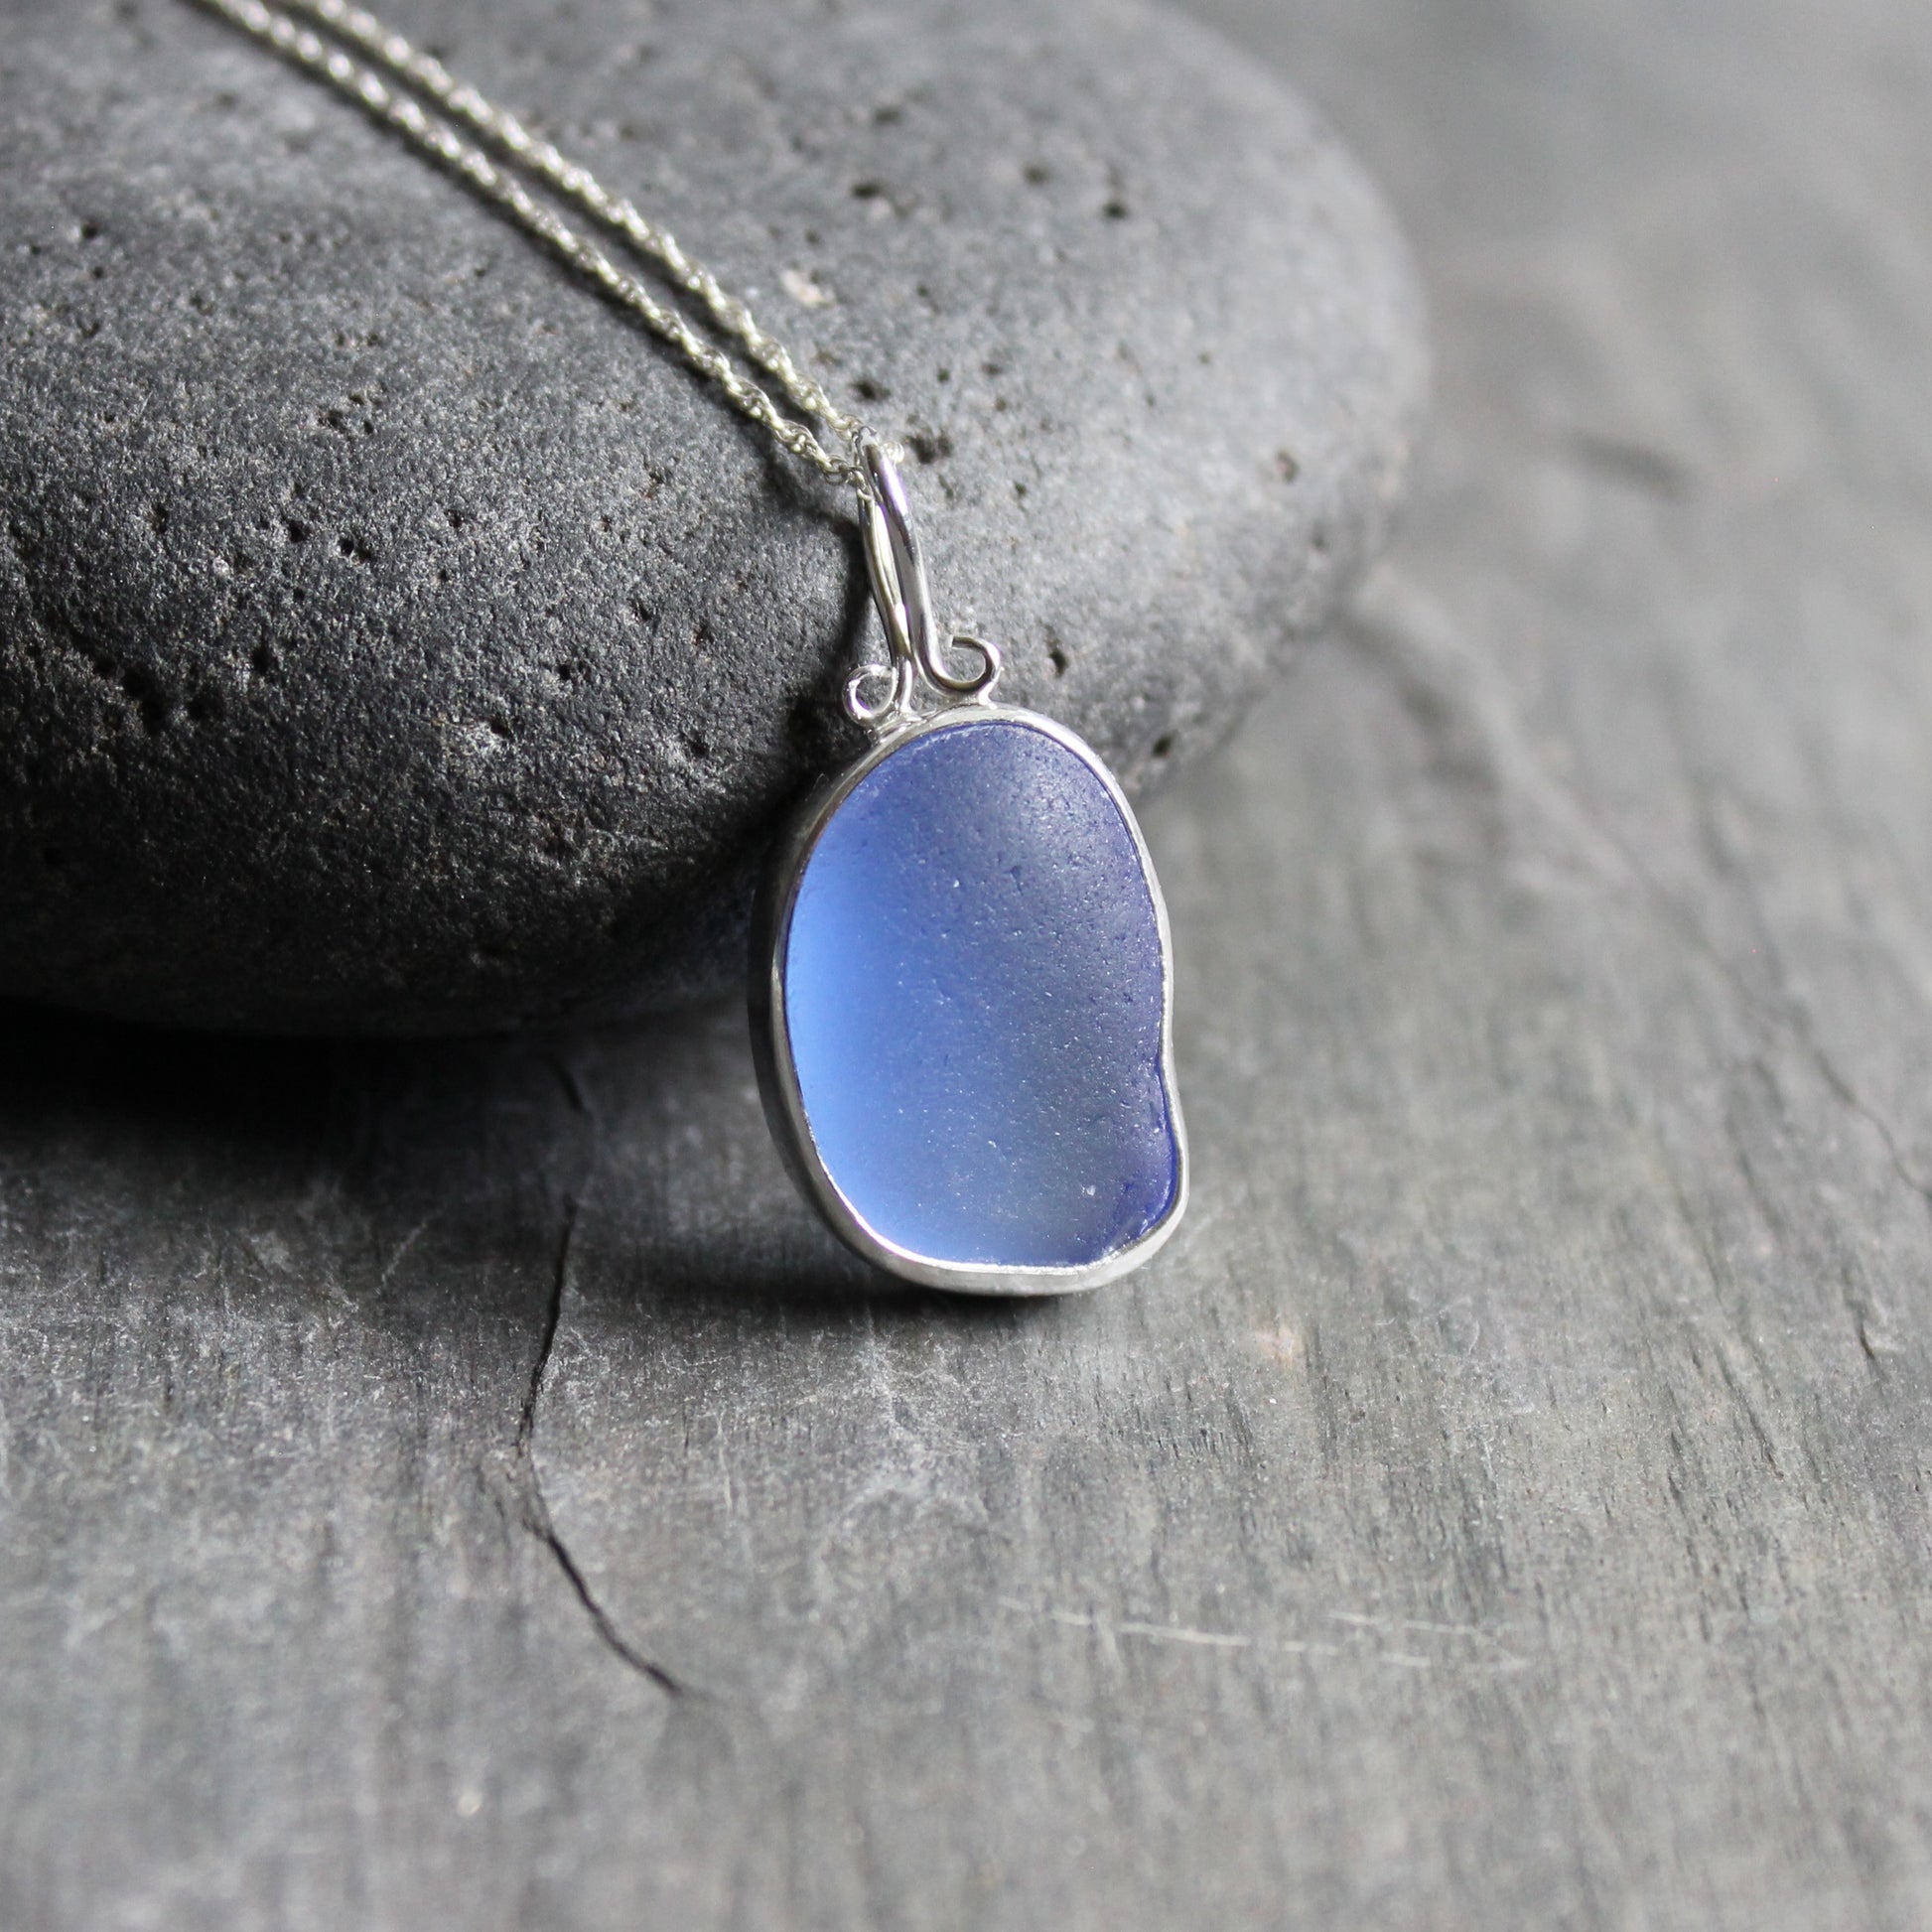 This necklace has a large chunky piece of cornflower blue sea glass set in a fine & sterling silver bezel setting on a sterling silver chain. 